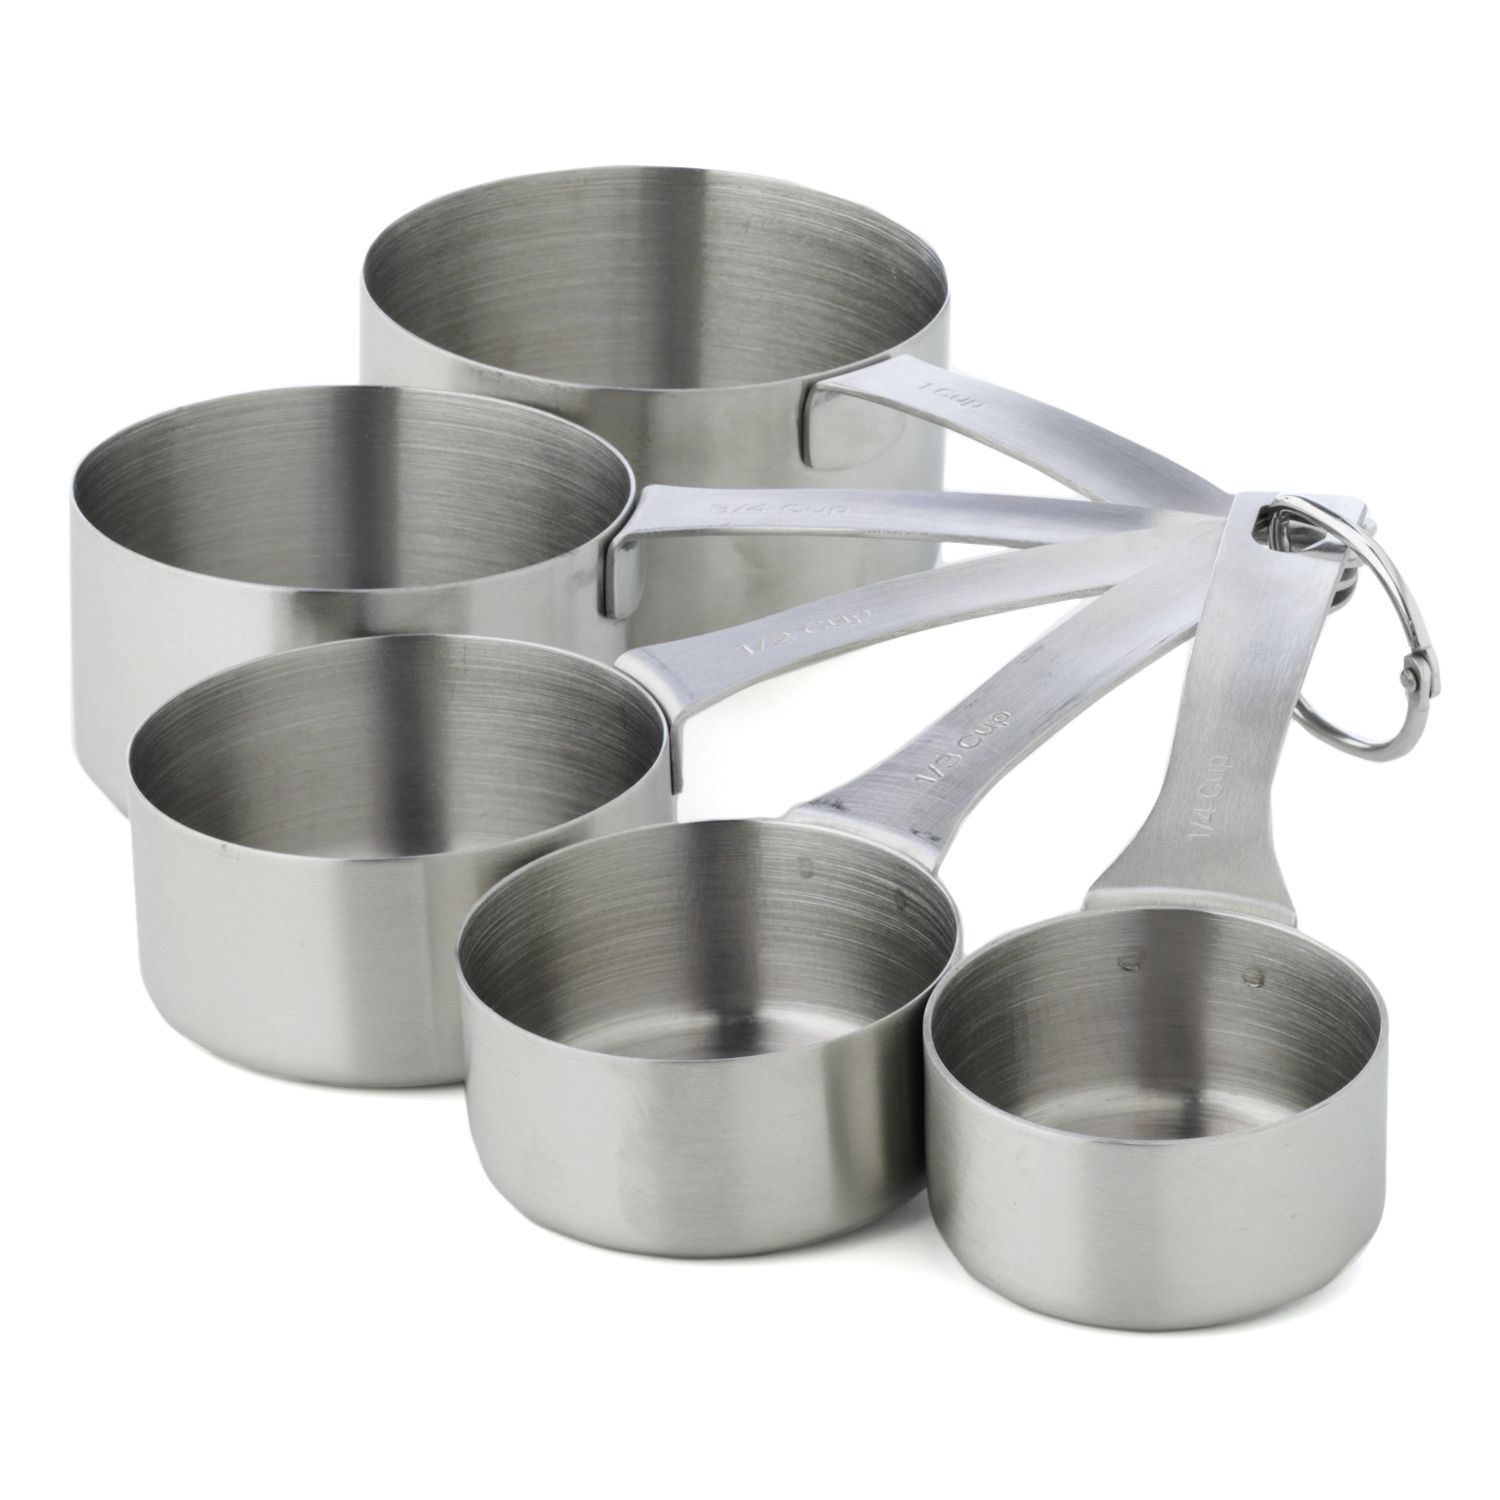 Progressive Stacking Measuring Cups 1/4 Cup, 1/3 Cup, 1/2 Cup, 1 Cup by /  Heavy Gauge Stainless Steel Measuring Cups 